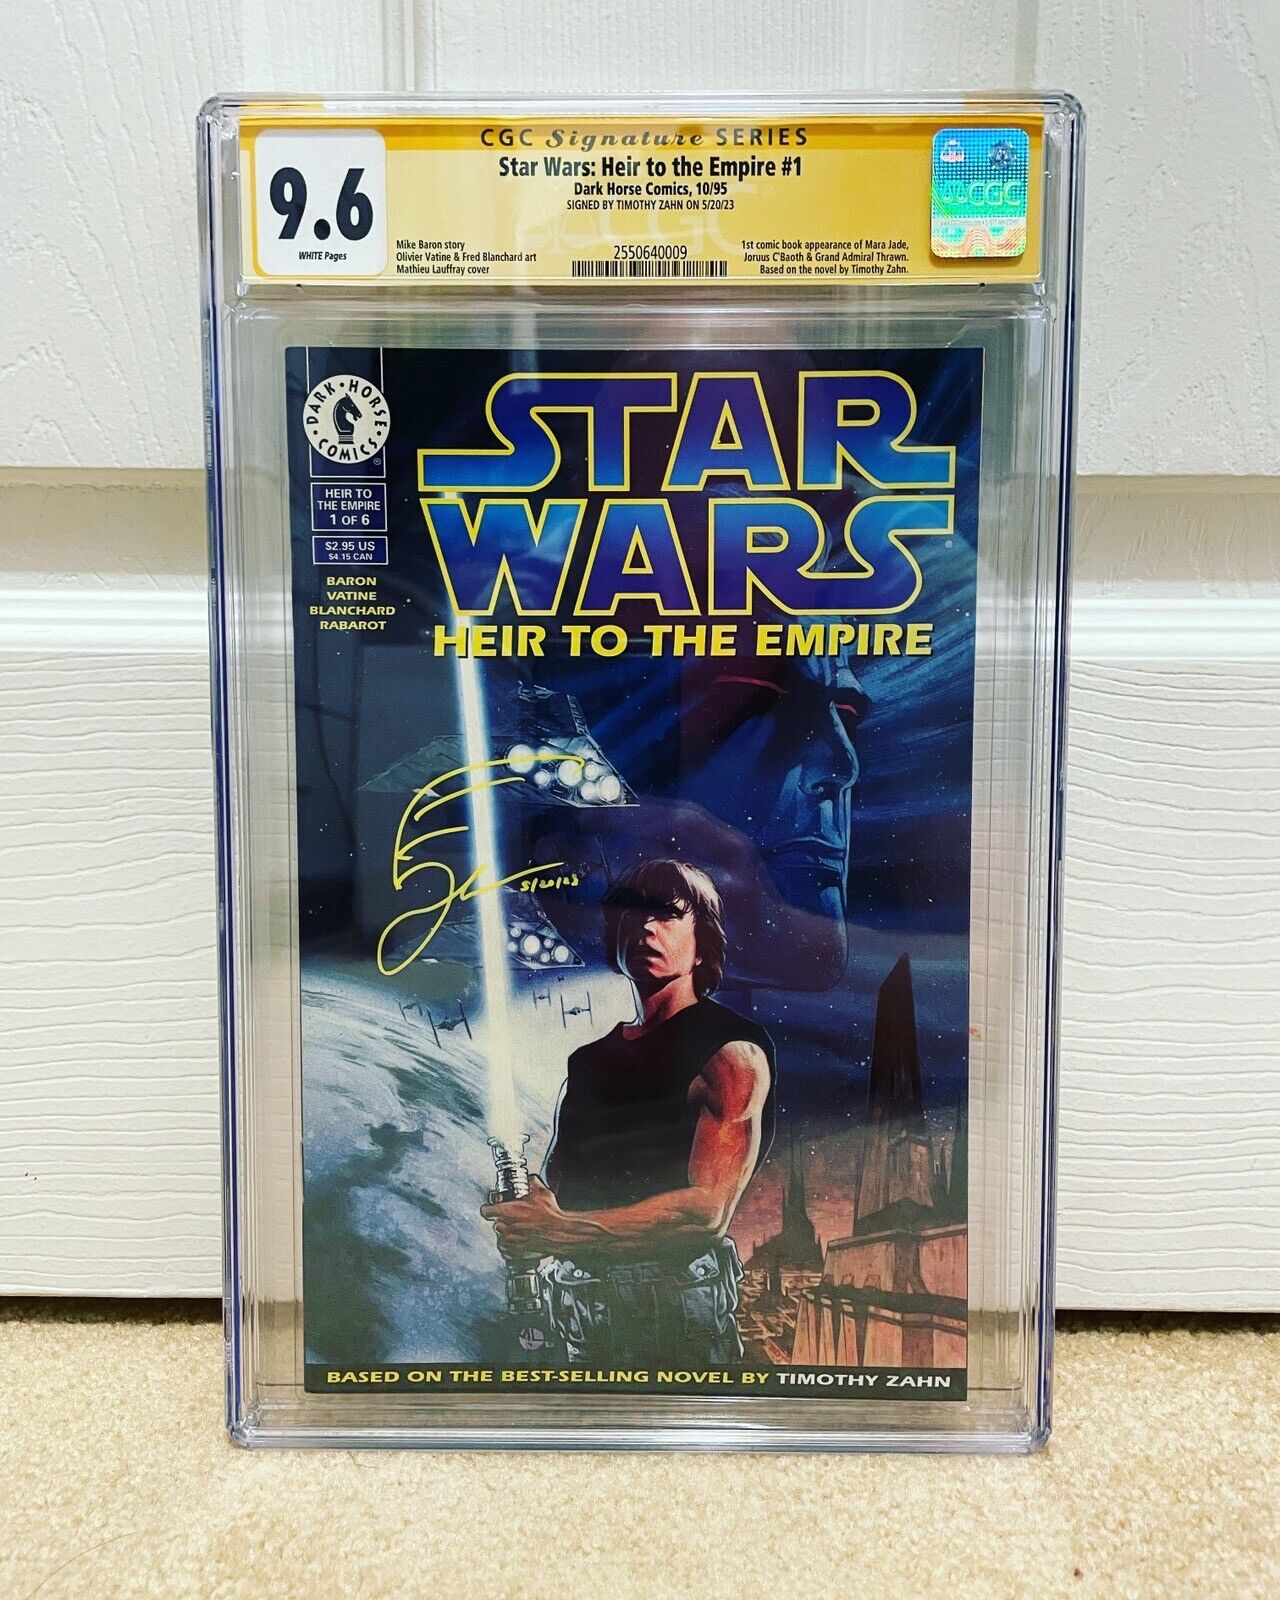 Star Wars: Heir to the Empire #1 CGC 9.6 signed by Timothy Zahn (1 of only 22)